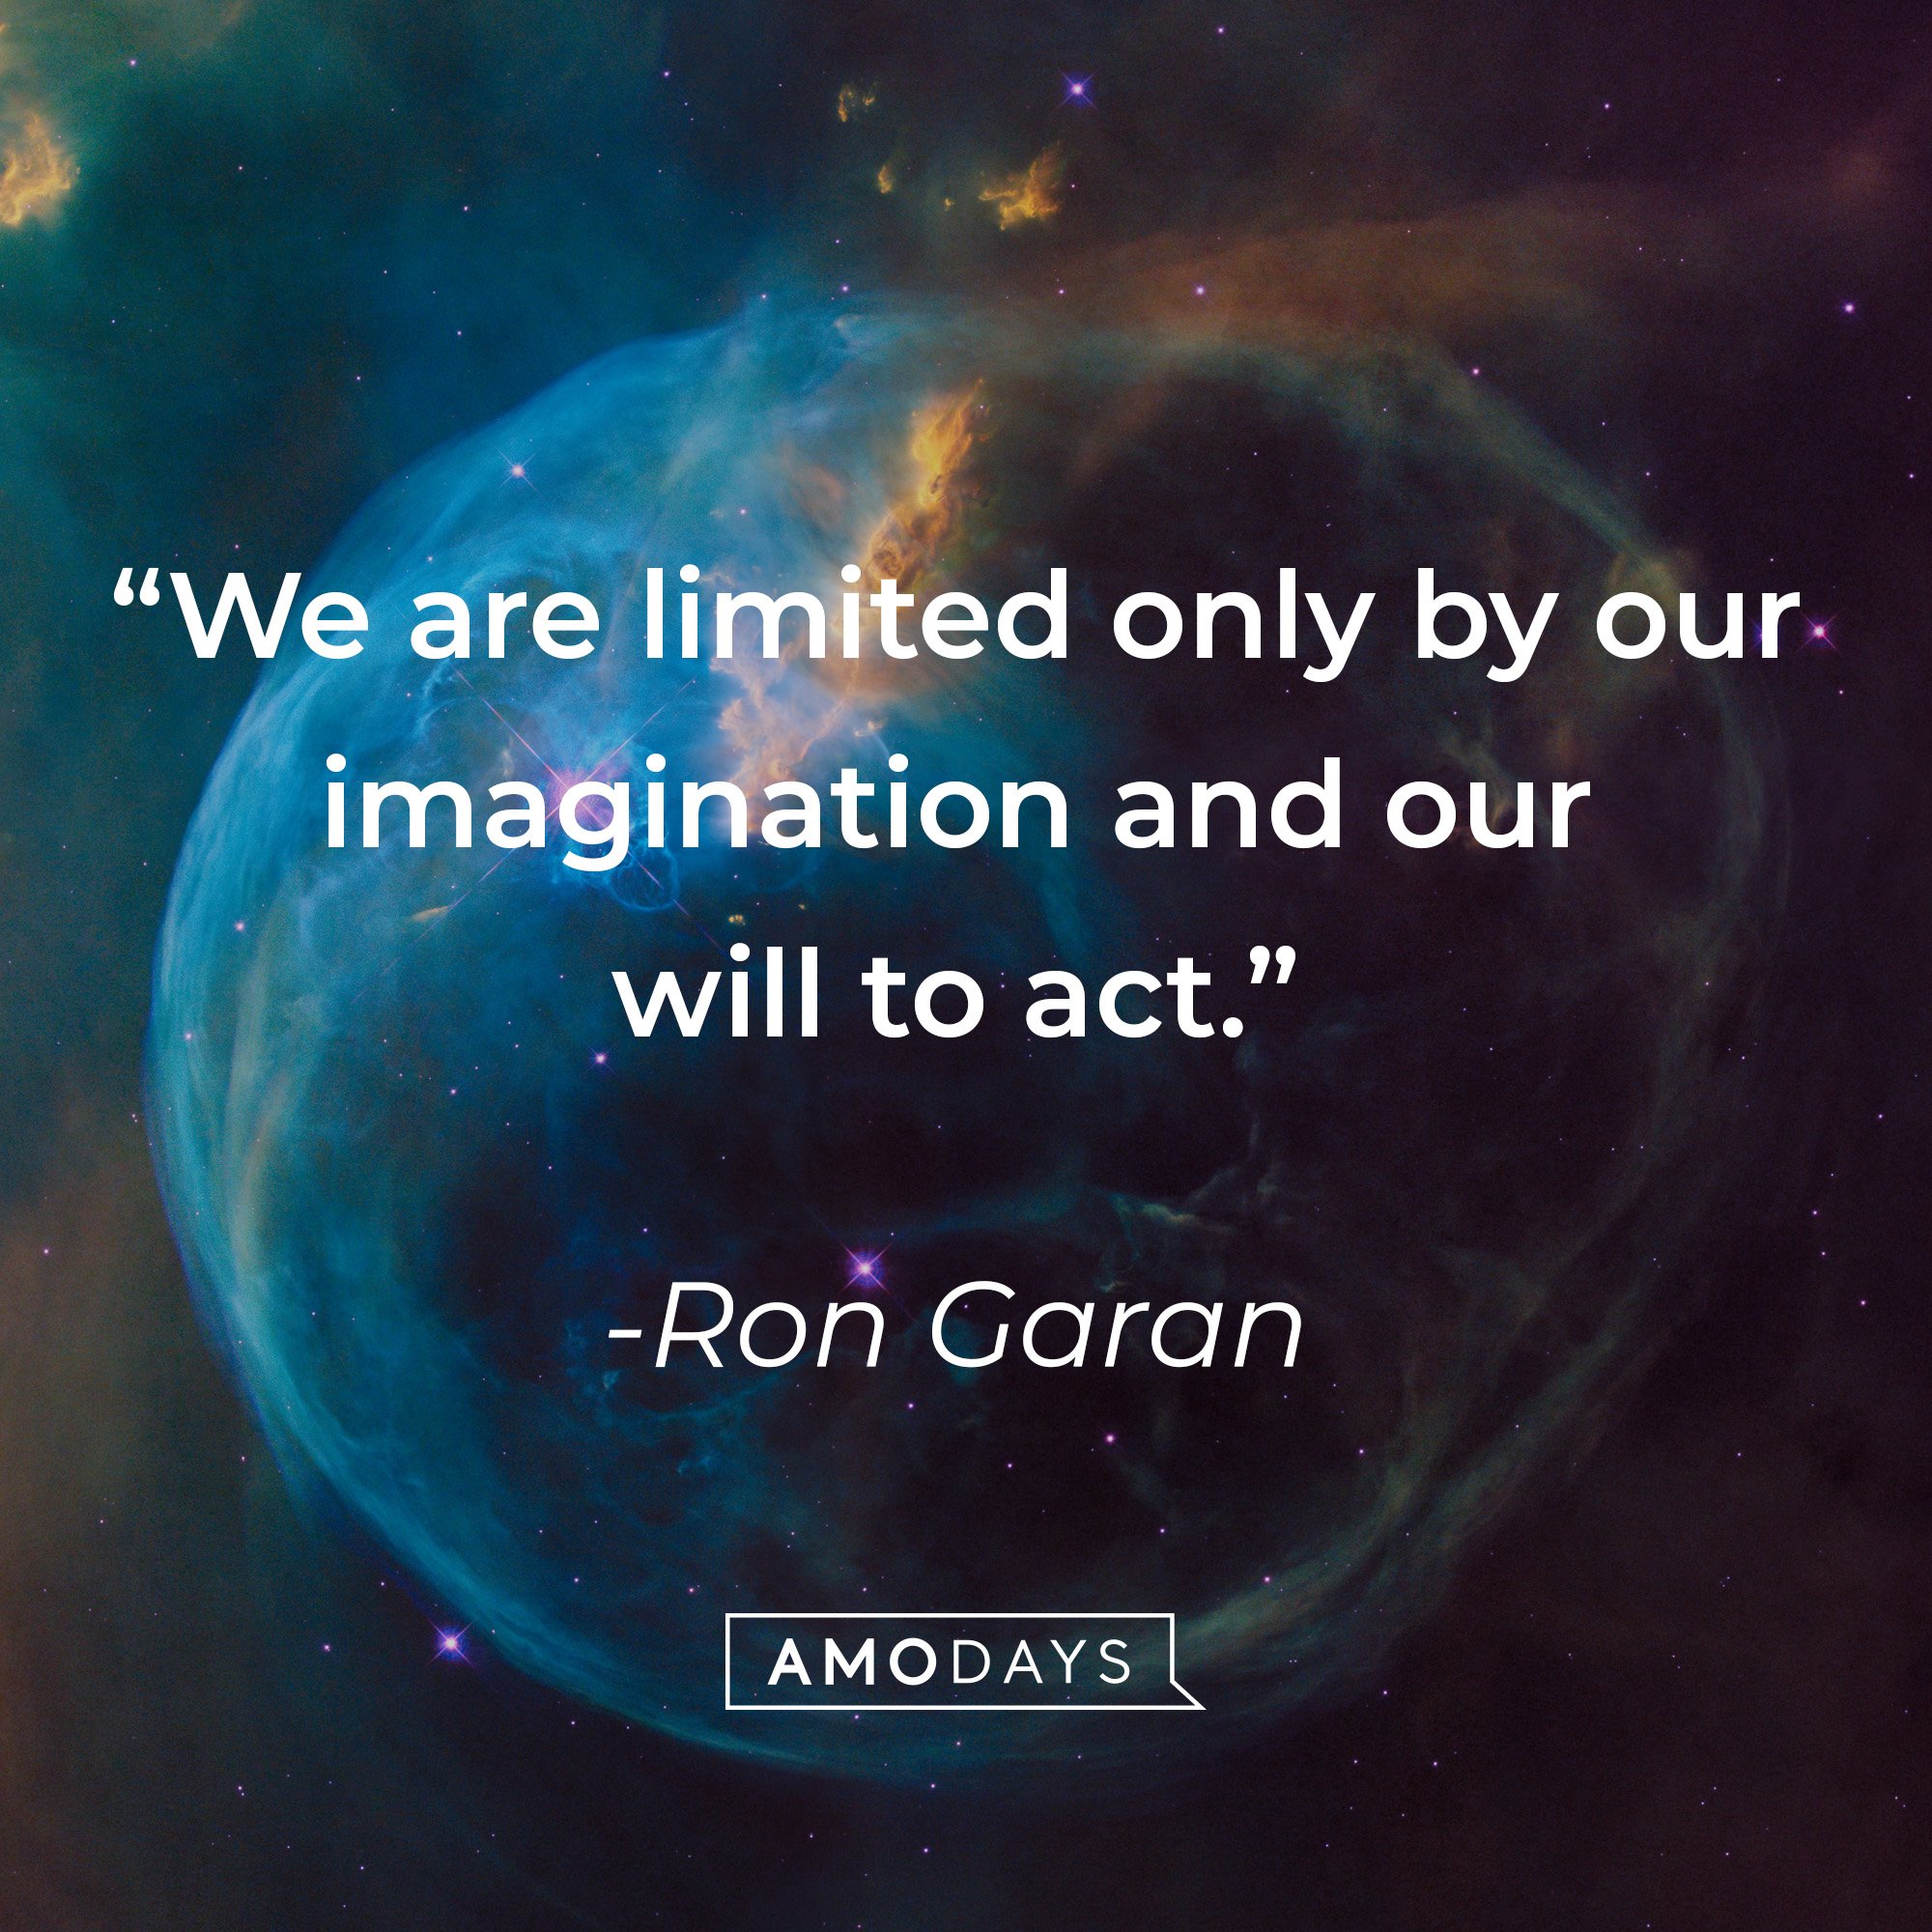 Ron Garan’s quote: “We are limited only by our imagination and our will to act.” | Image: AmoDays